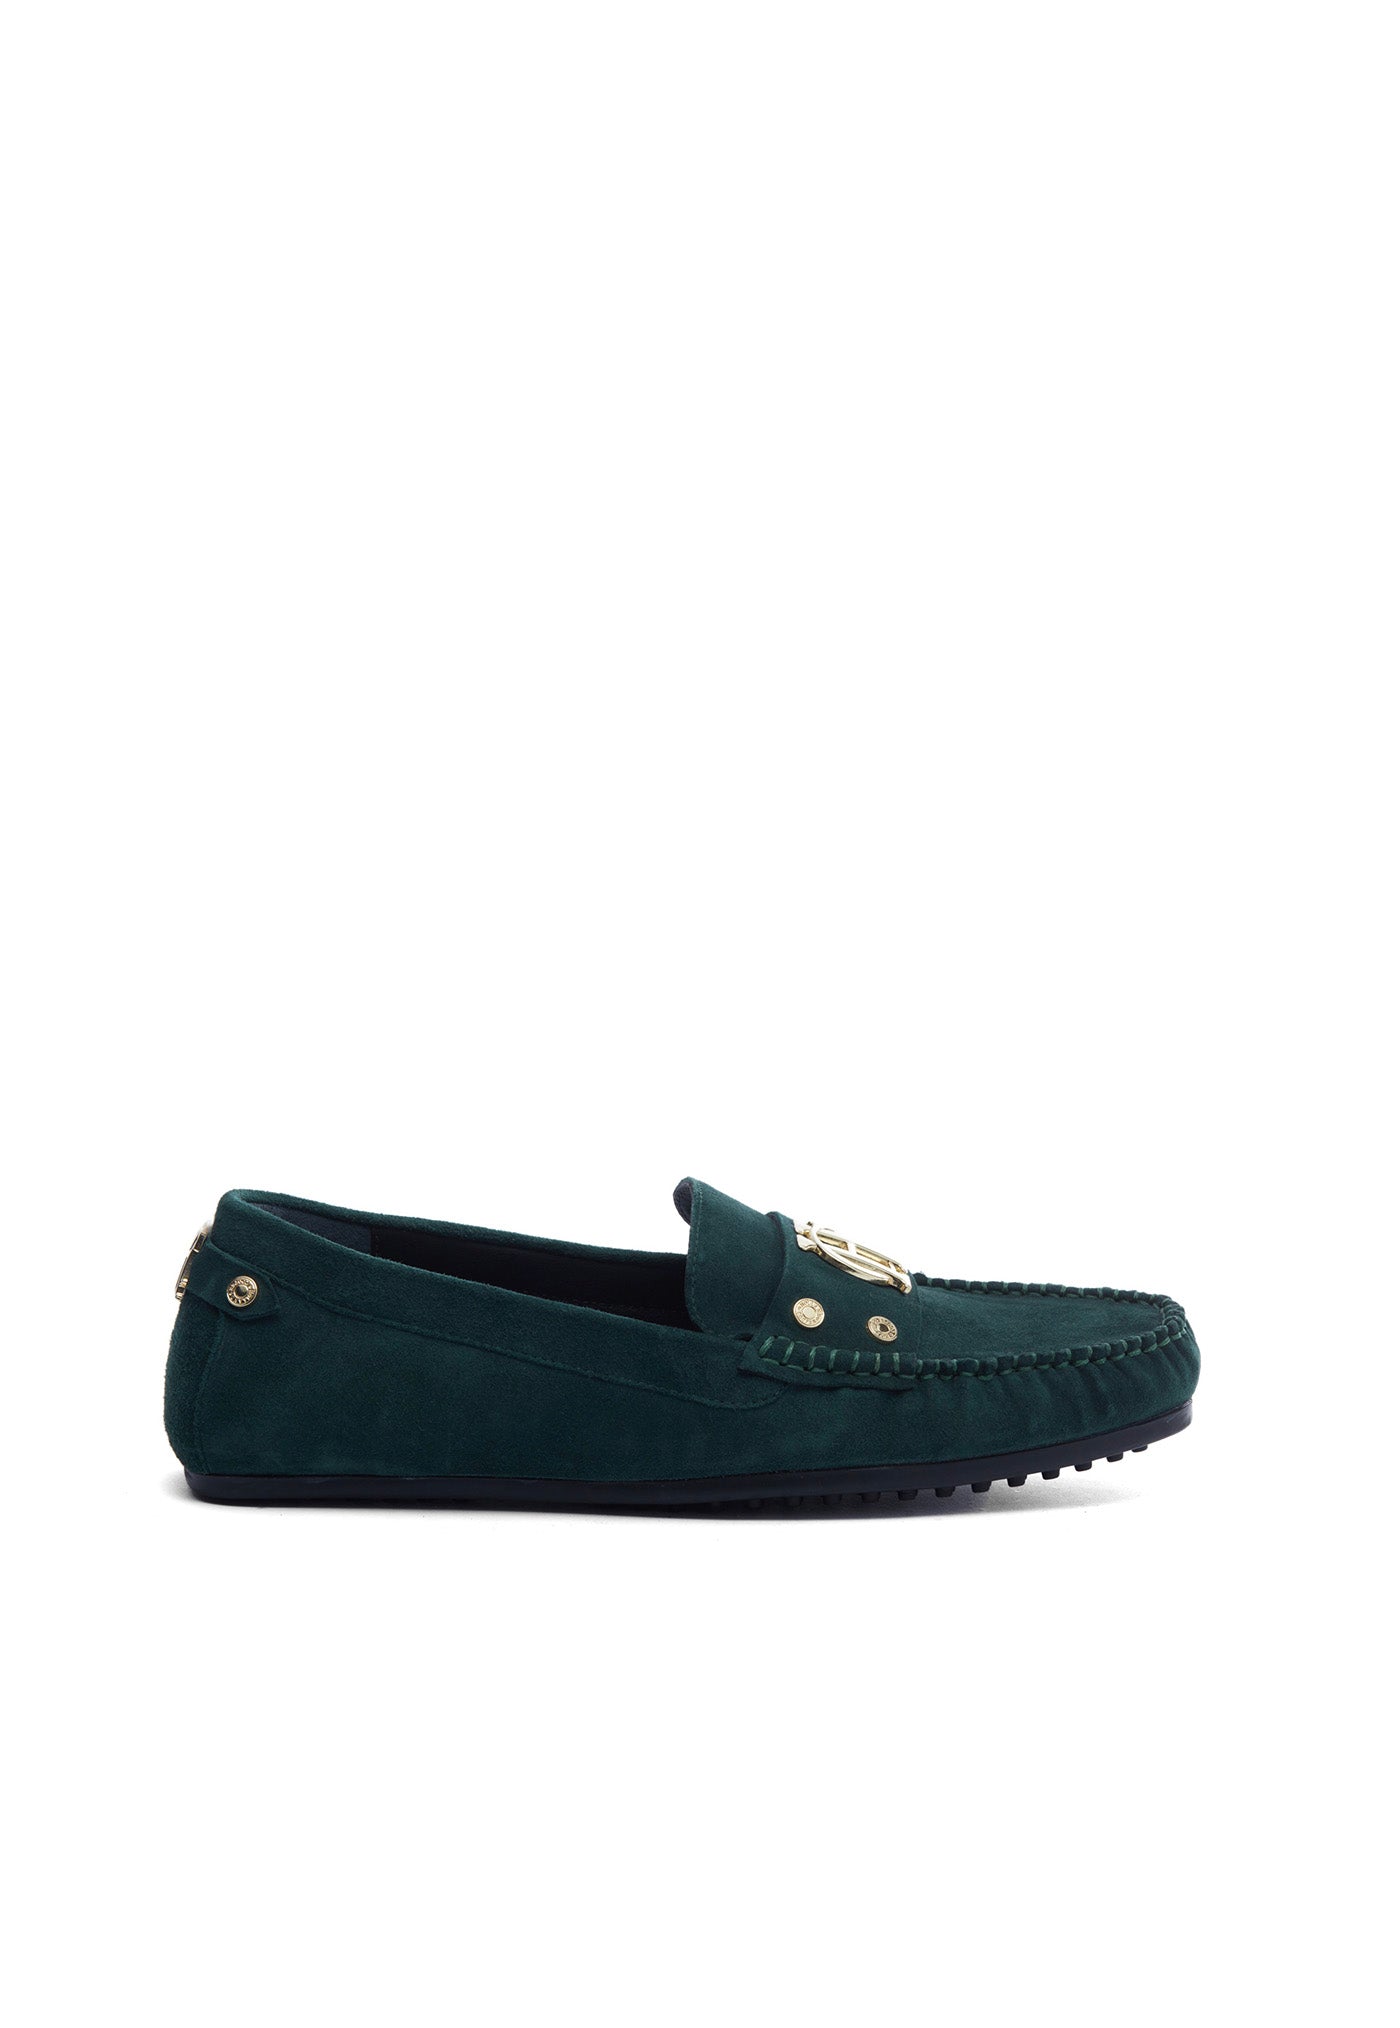 The Driving Loafer - Emerald sold by Angel Divine